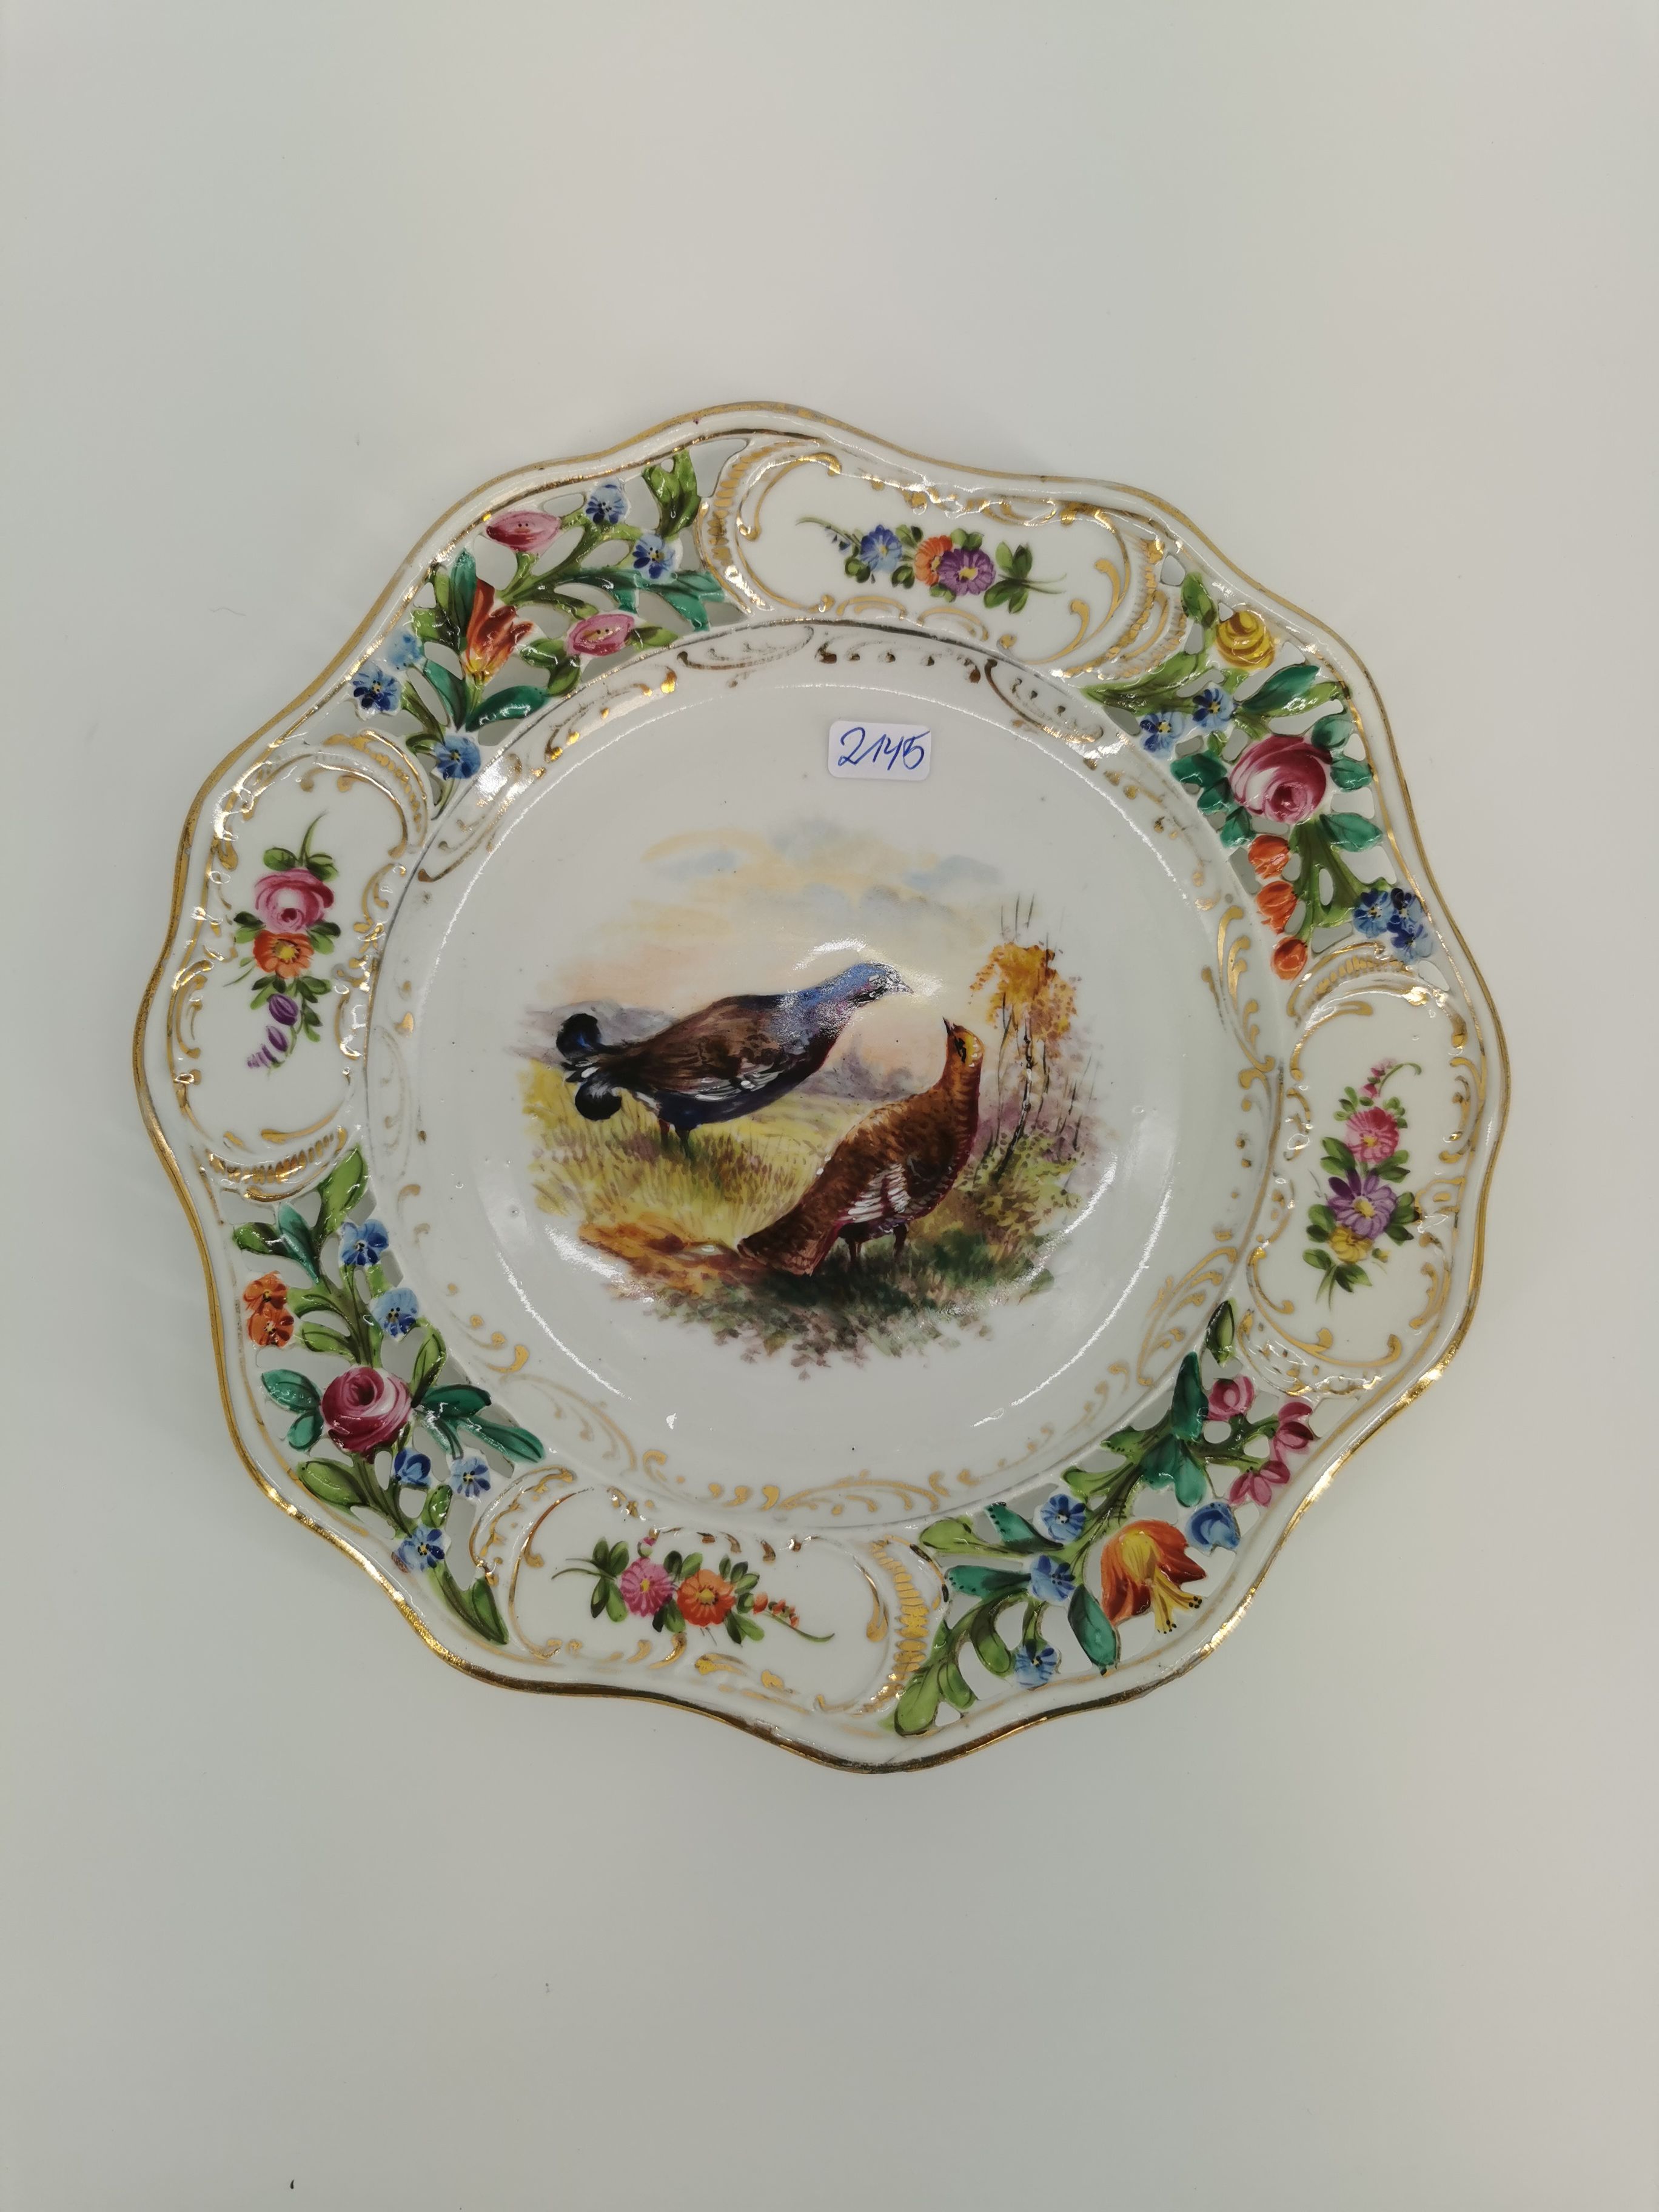 HUNTING PLATE